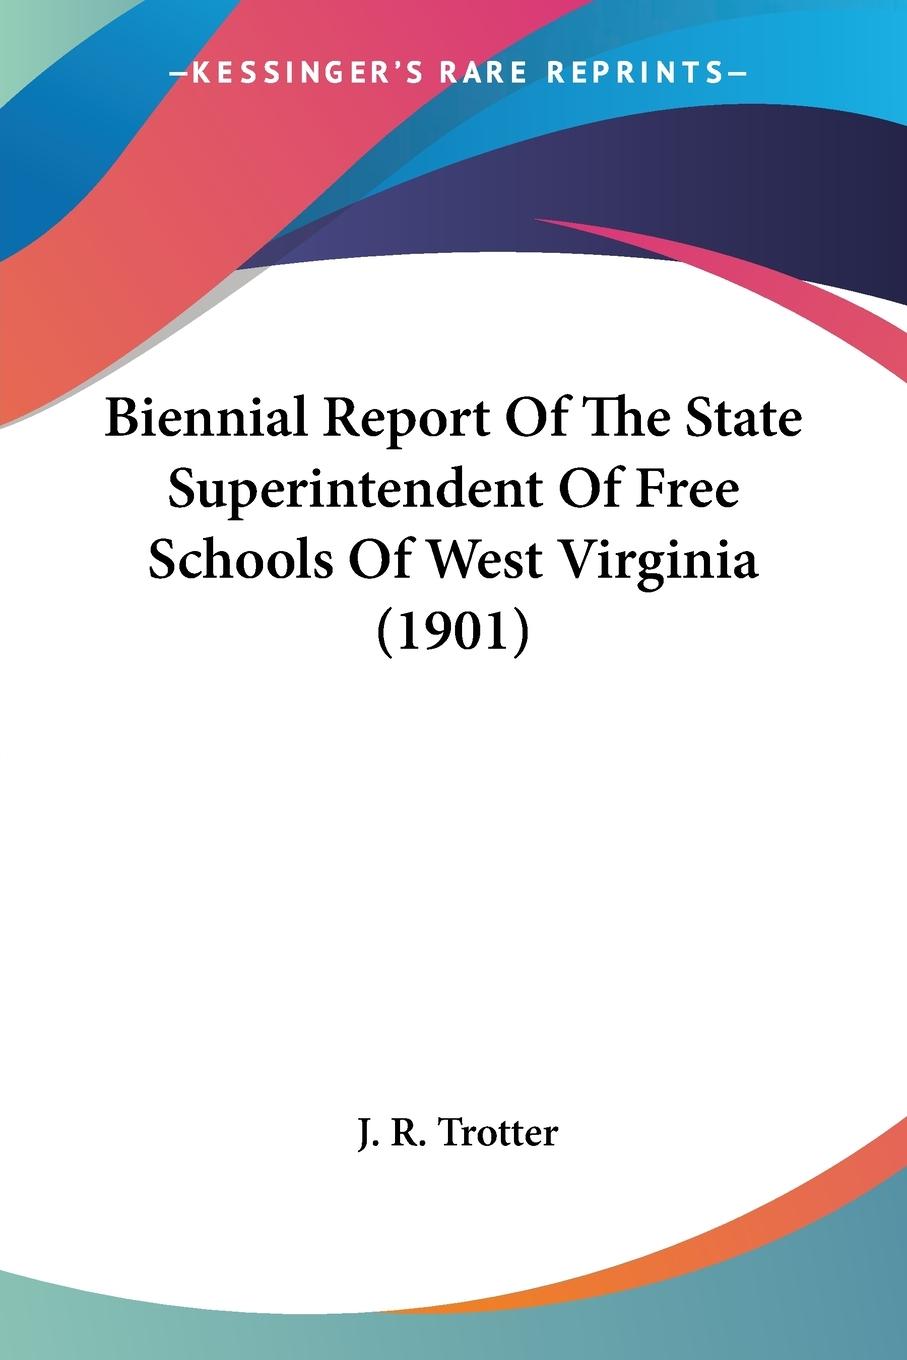 Biennial Report Of The State Superintendent Of Free Schools Of West Virginia (1901) - Trotter, J. R.